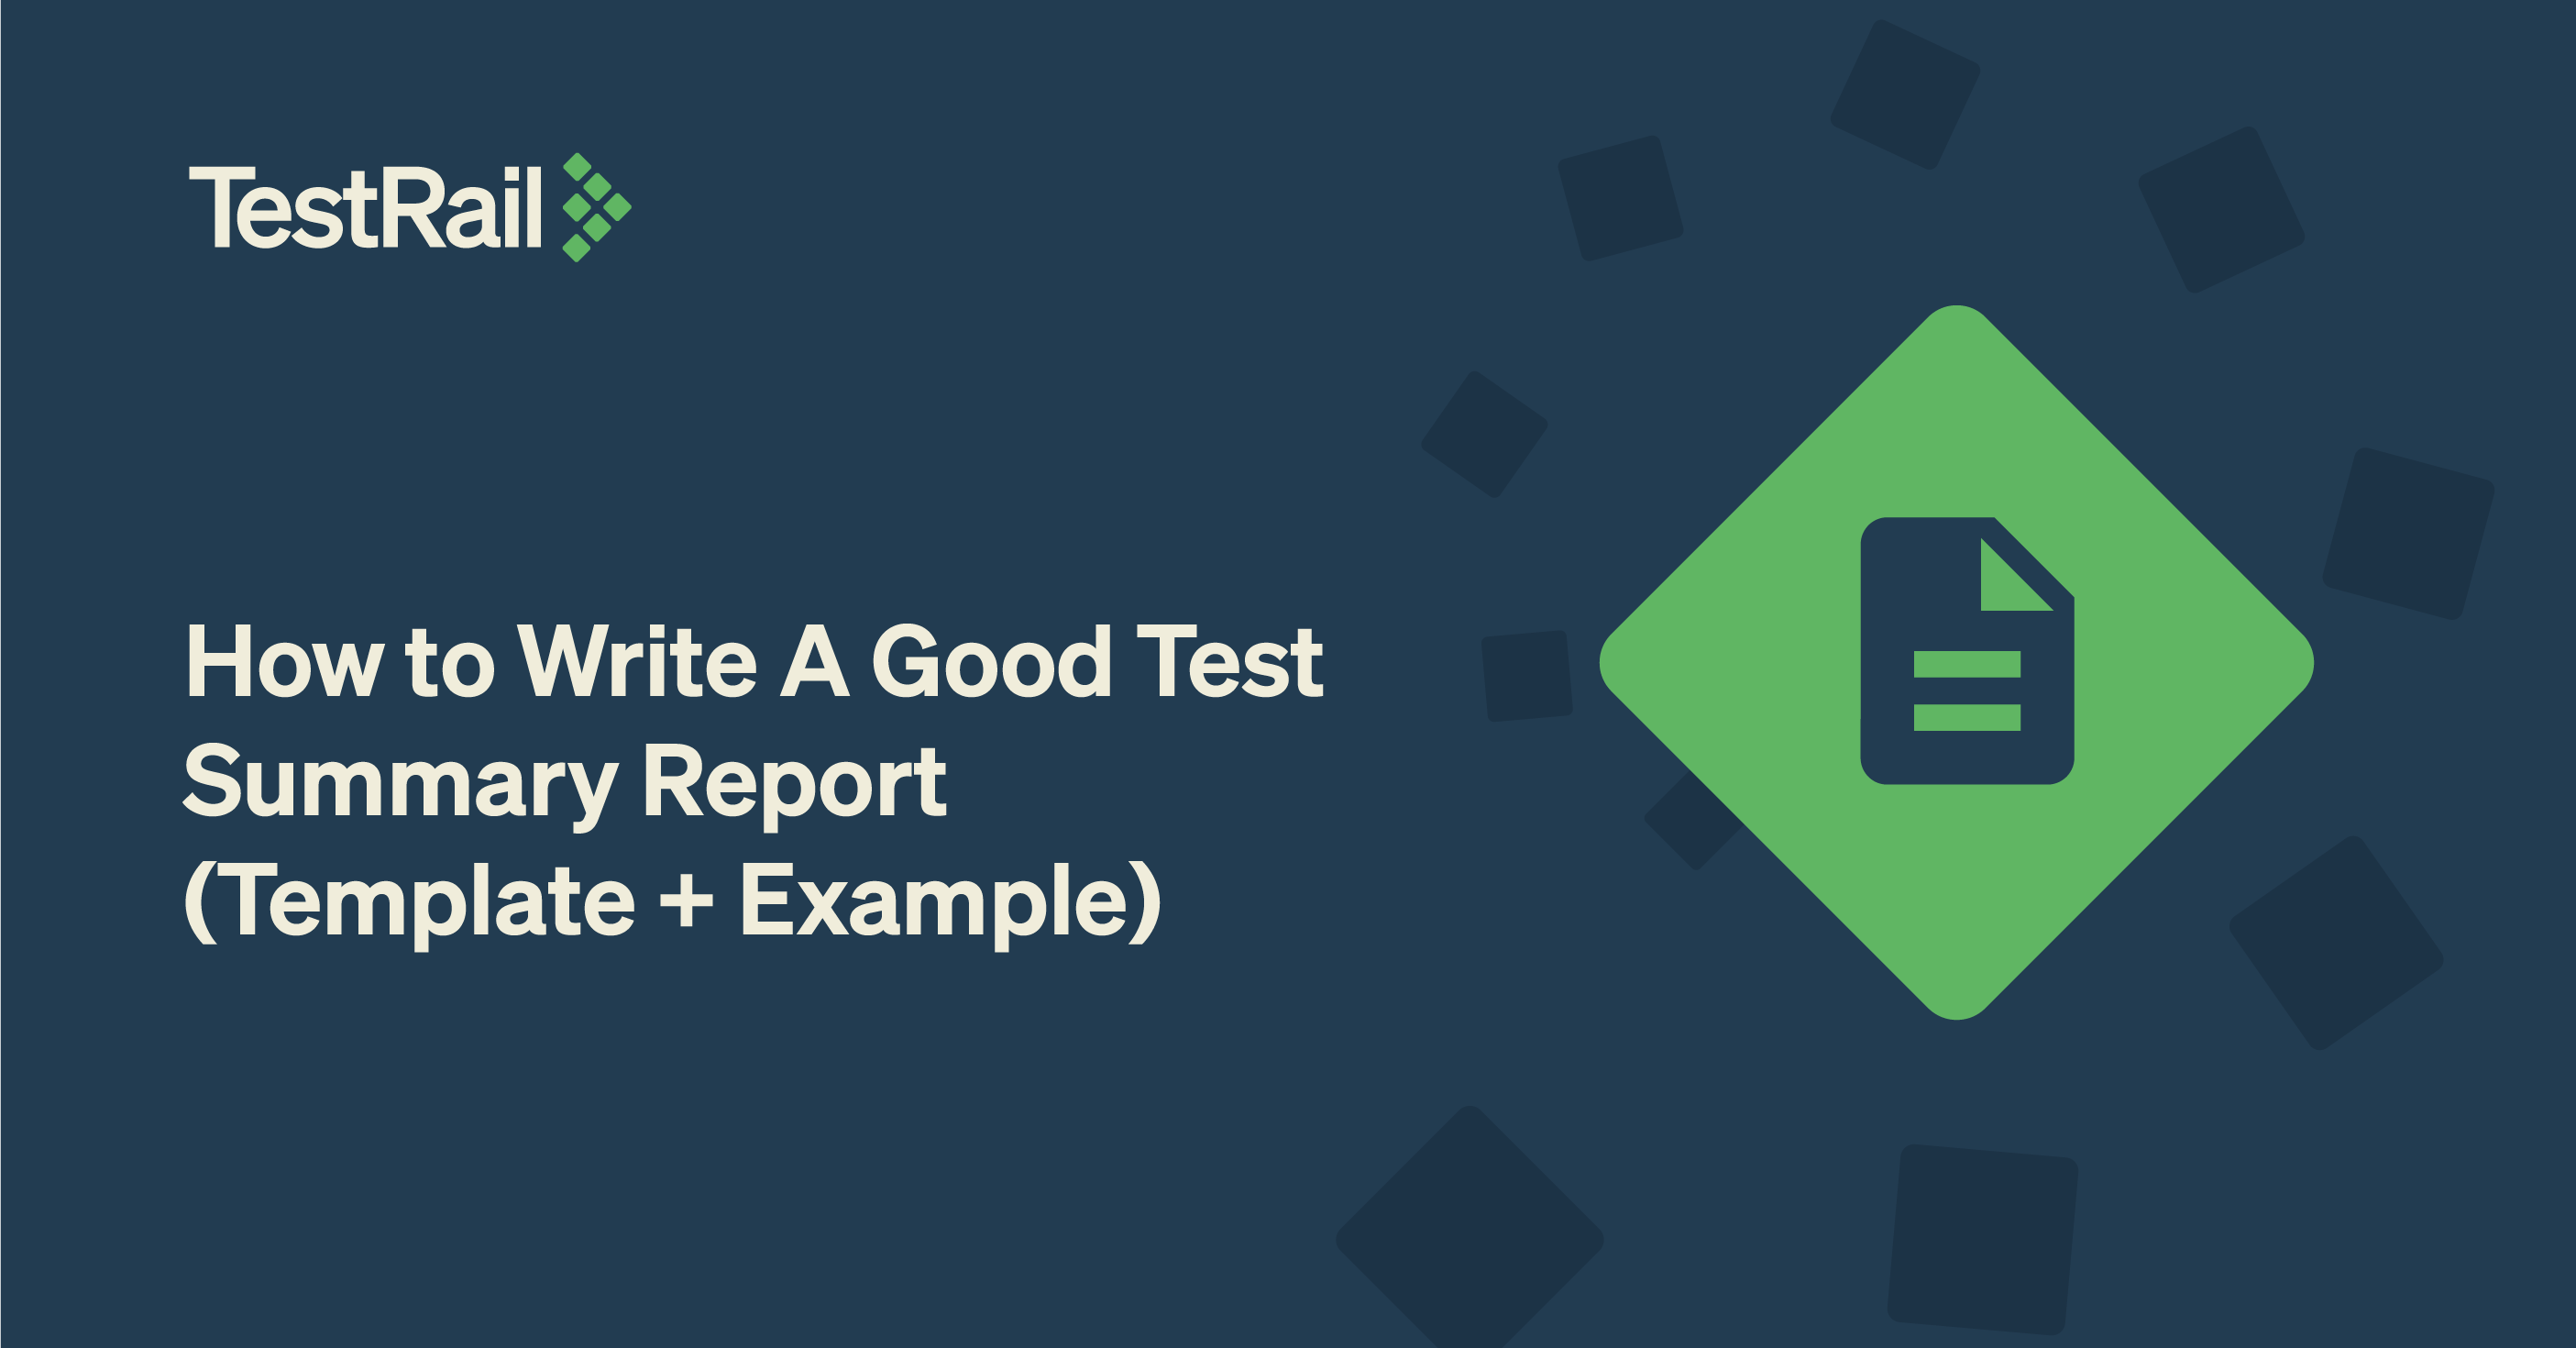 How to Write A Good Test Summary Report (Template + Example)